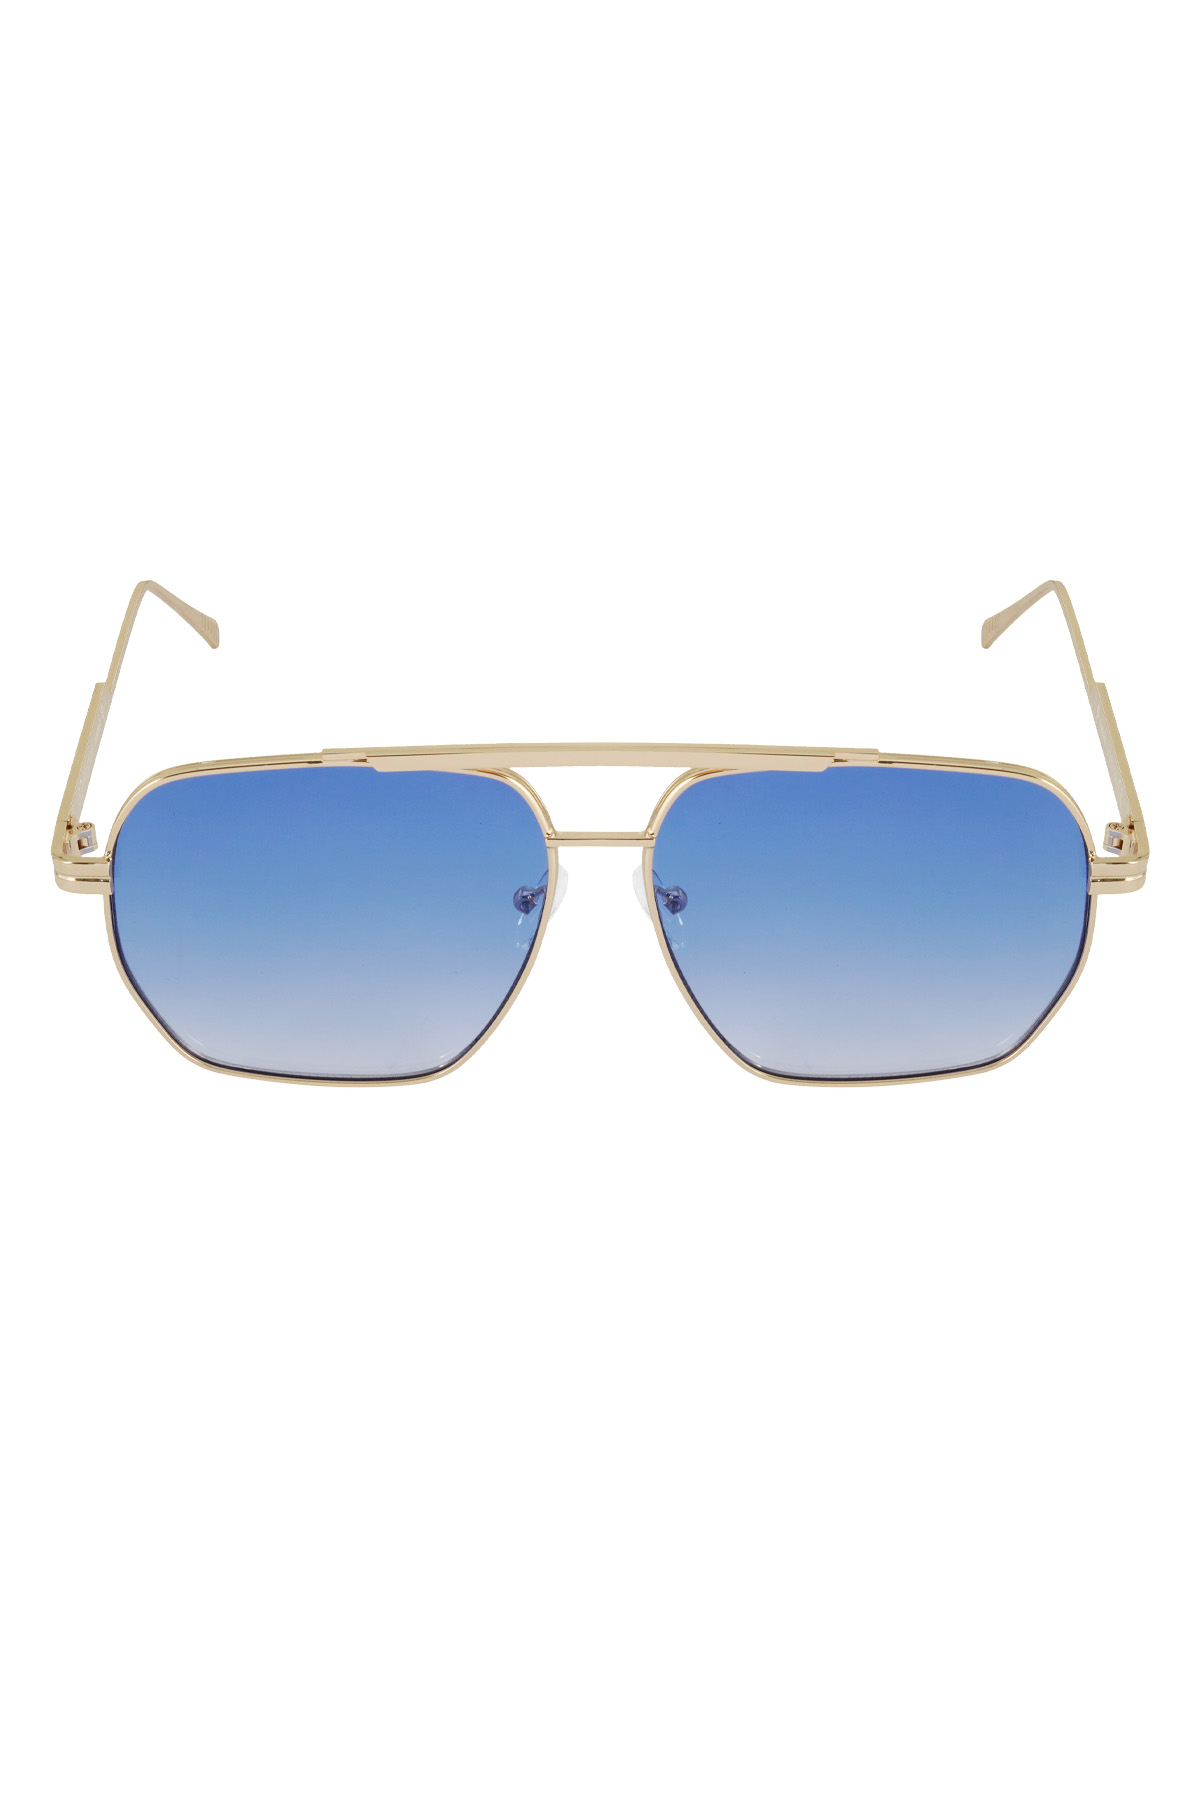 Metal summer sunglasses - Blue and gold Picture4